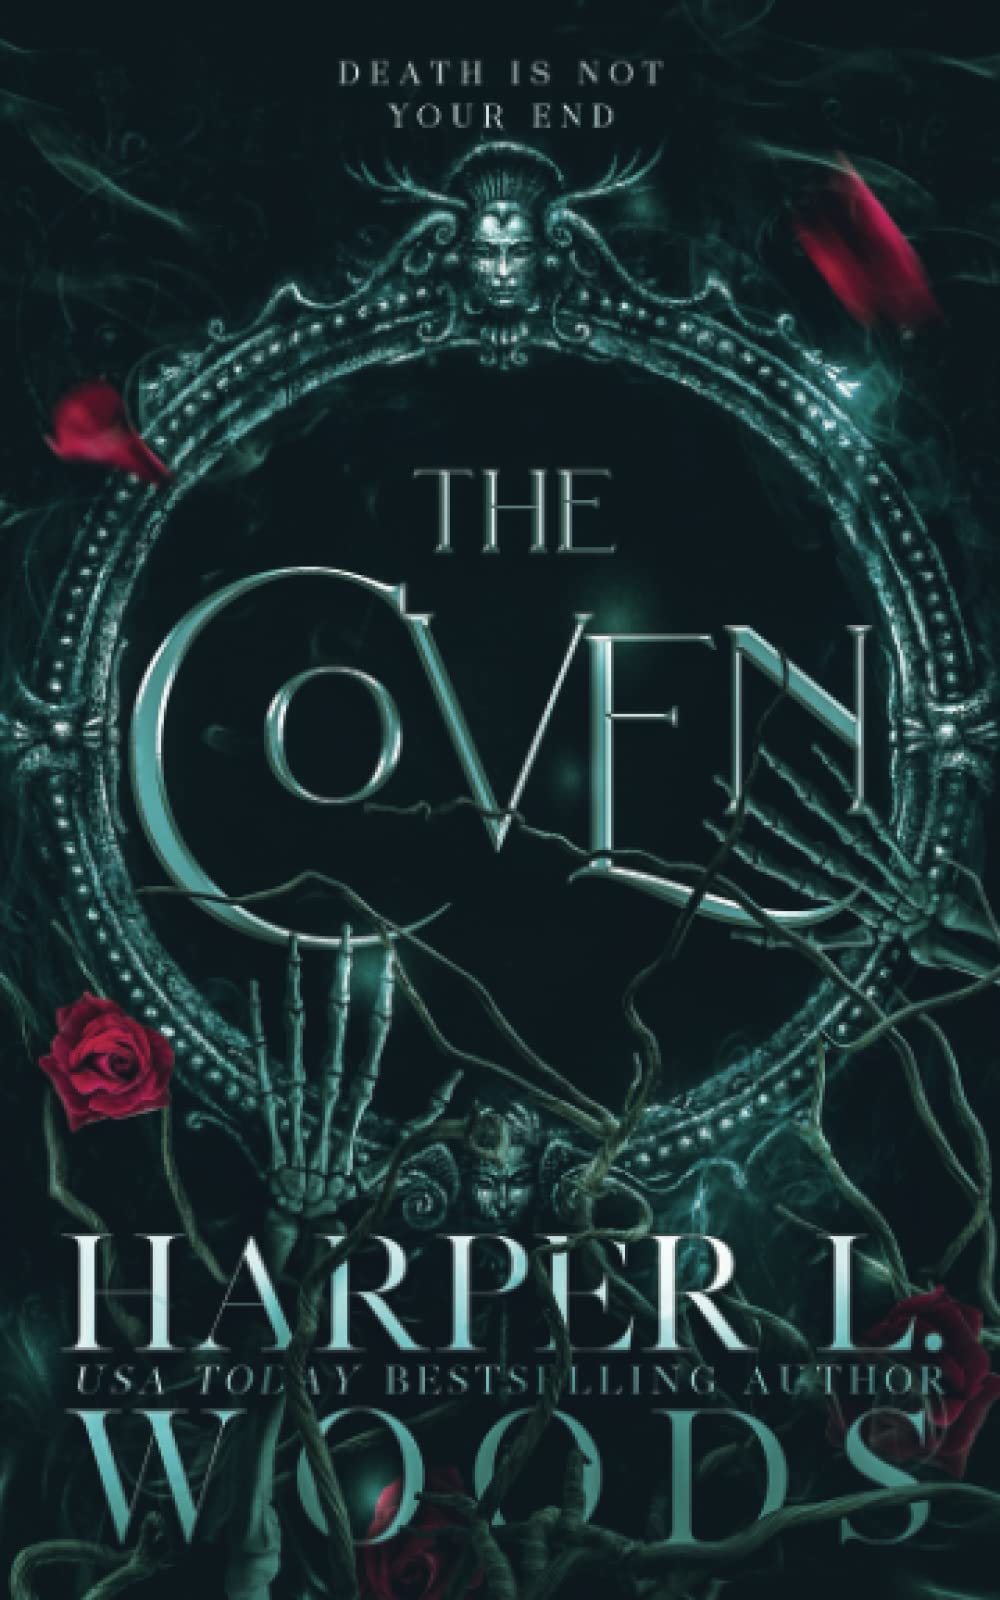 The Coven by Harper L. Woods, Adelaide Forrest